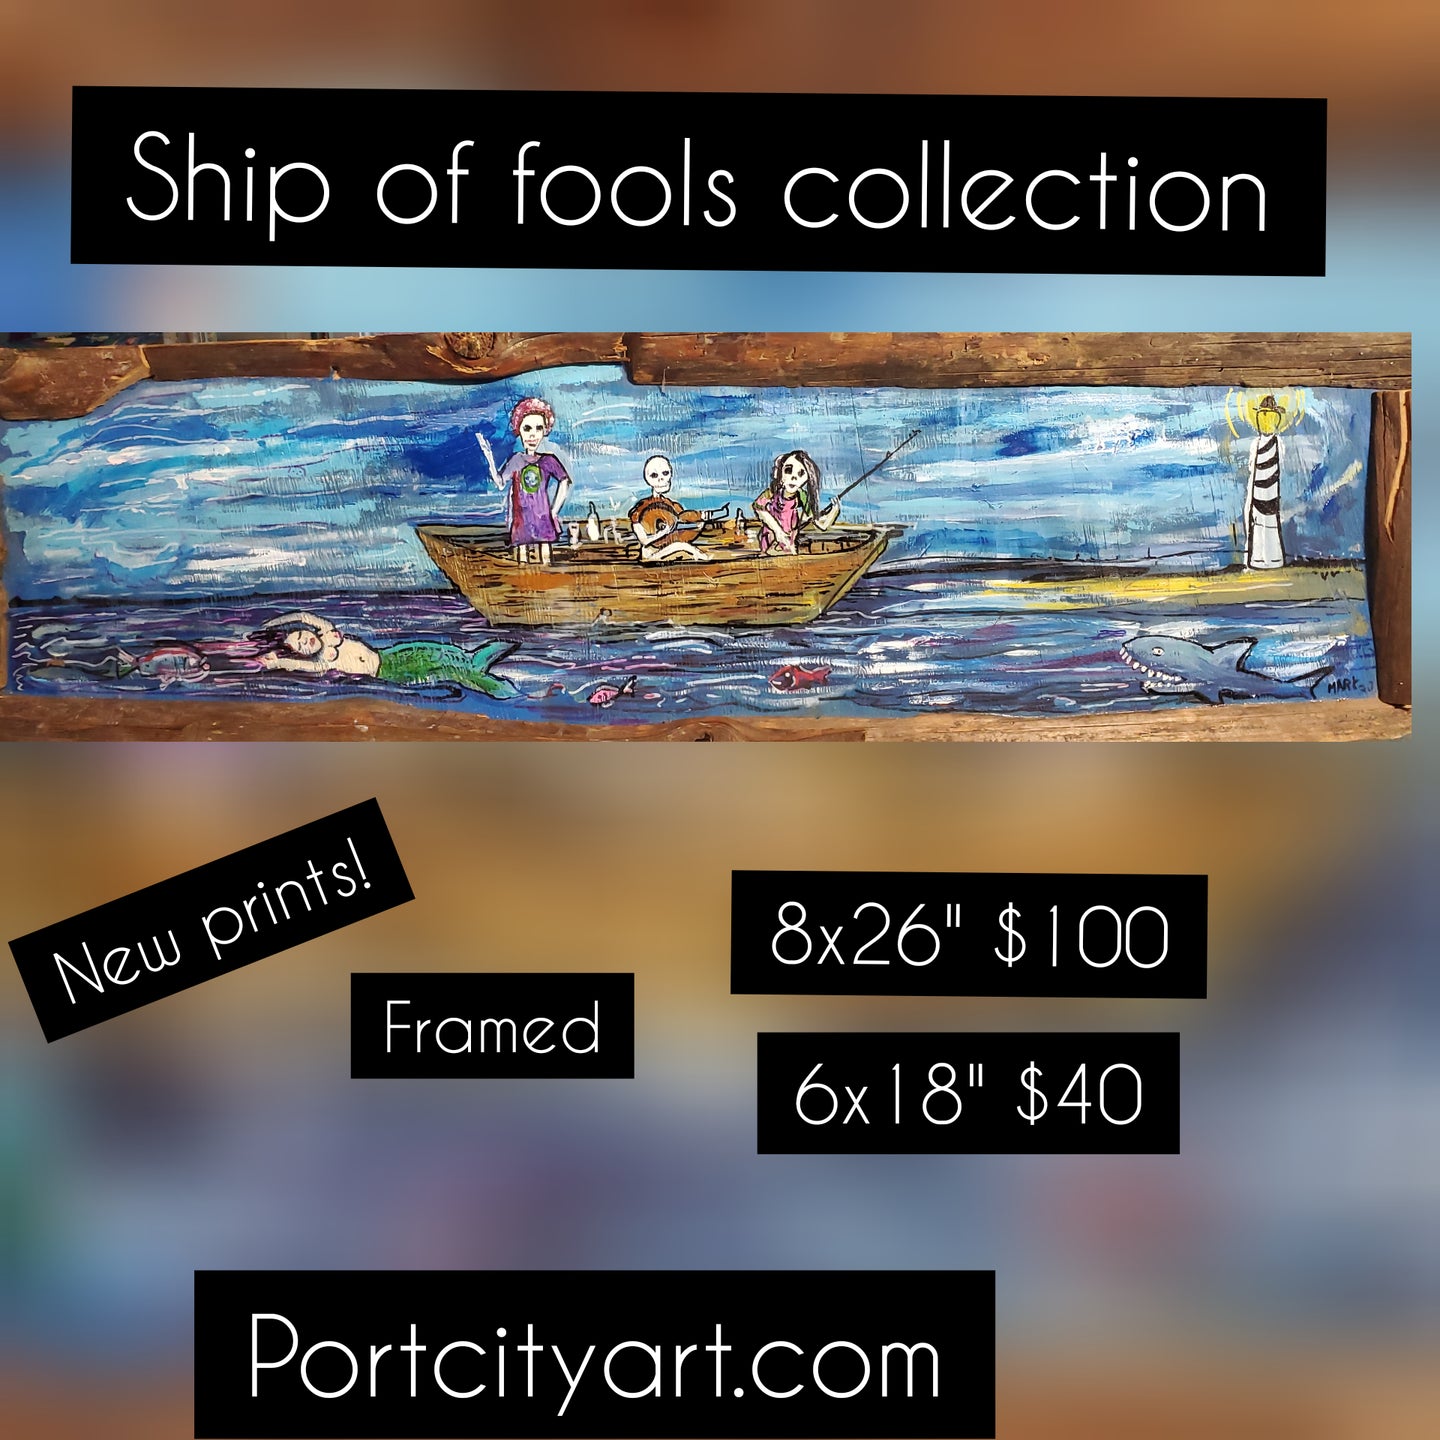 Ship of fools collection : shipwreck salvation